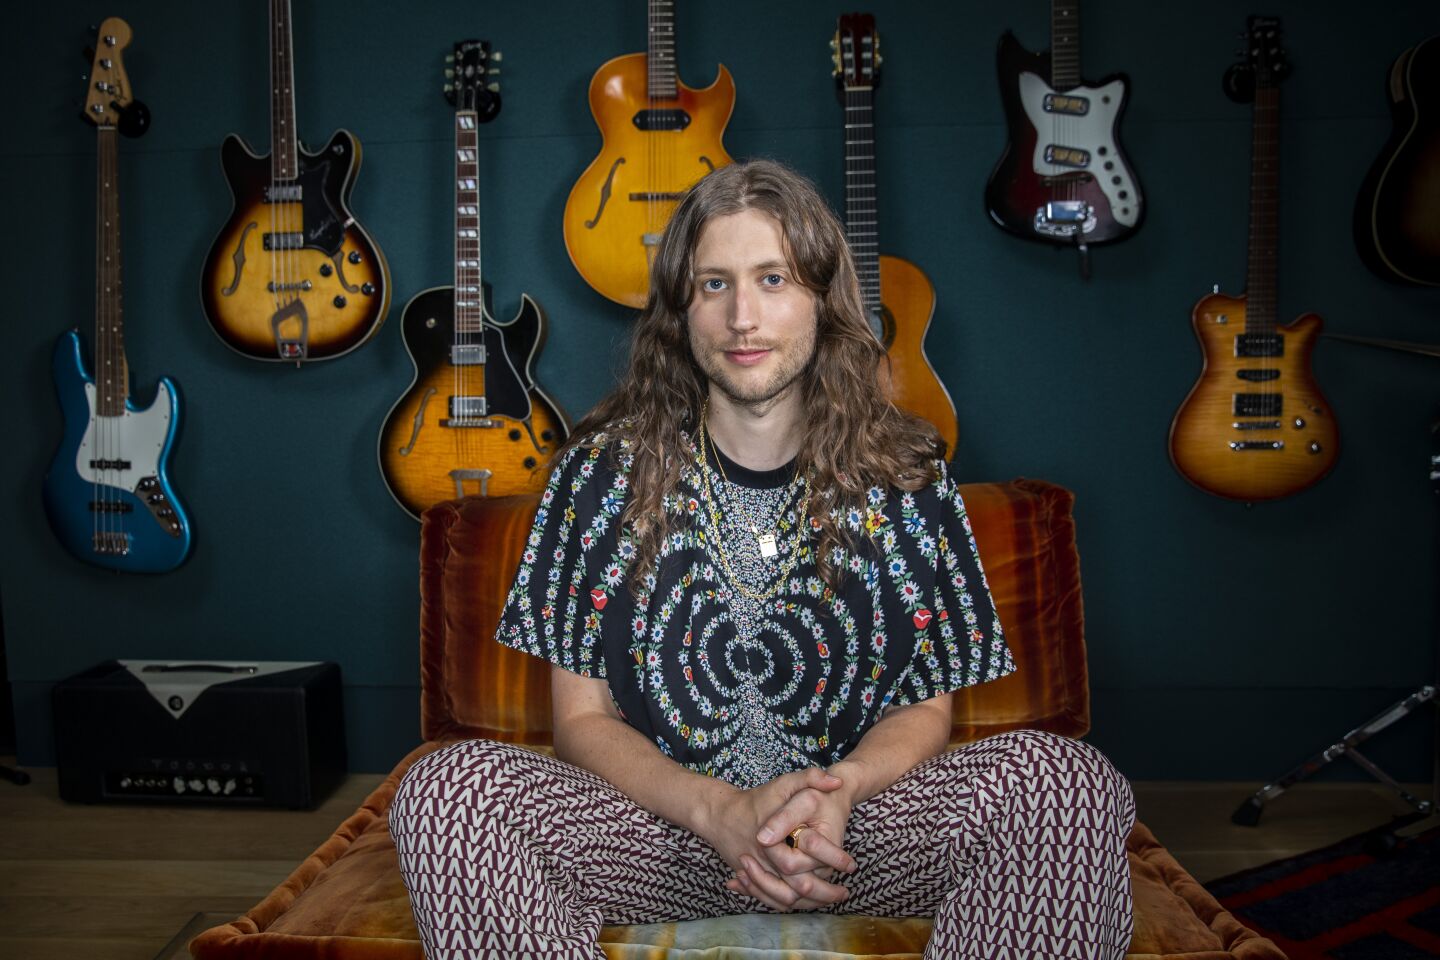 A closer look at Ludwig Göransson's fashion